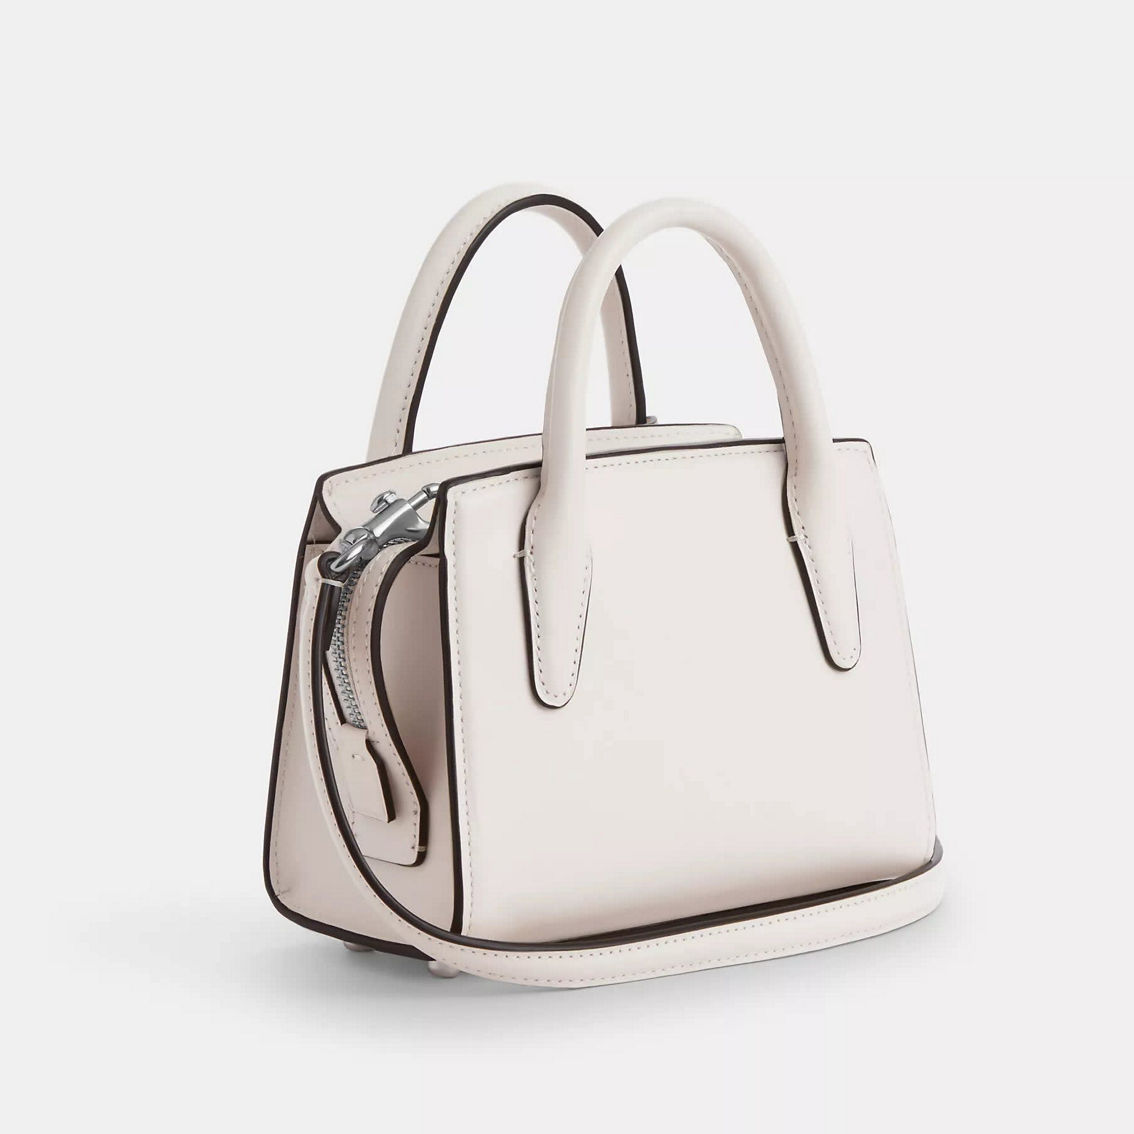 Coach Outlet Andrea Mini Carryall - Image 2 of 2